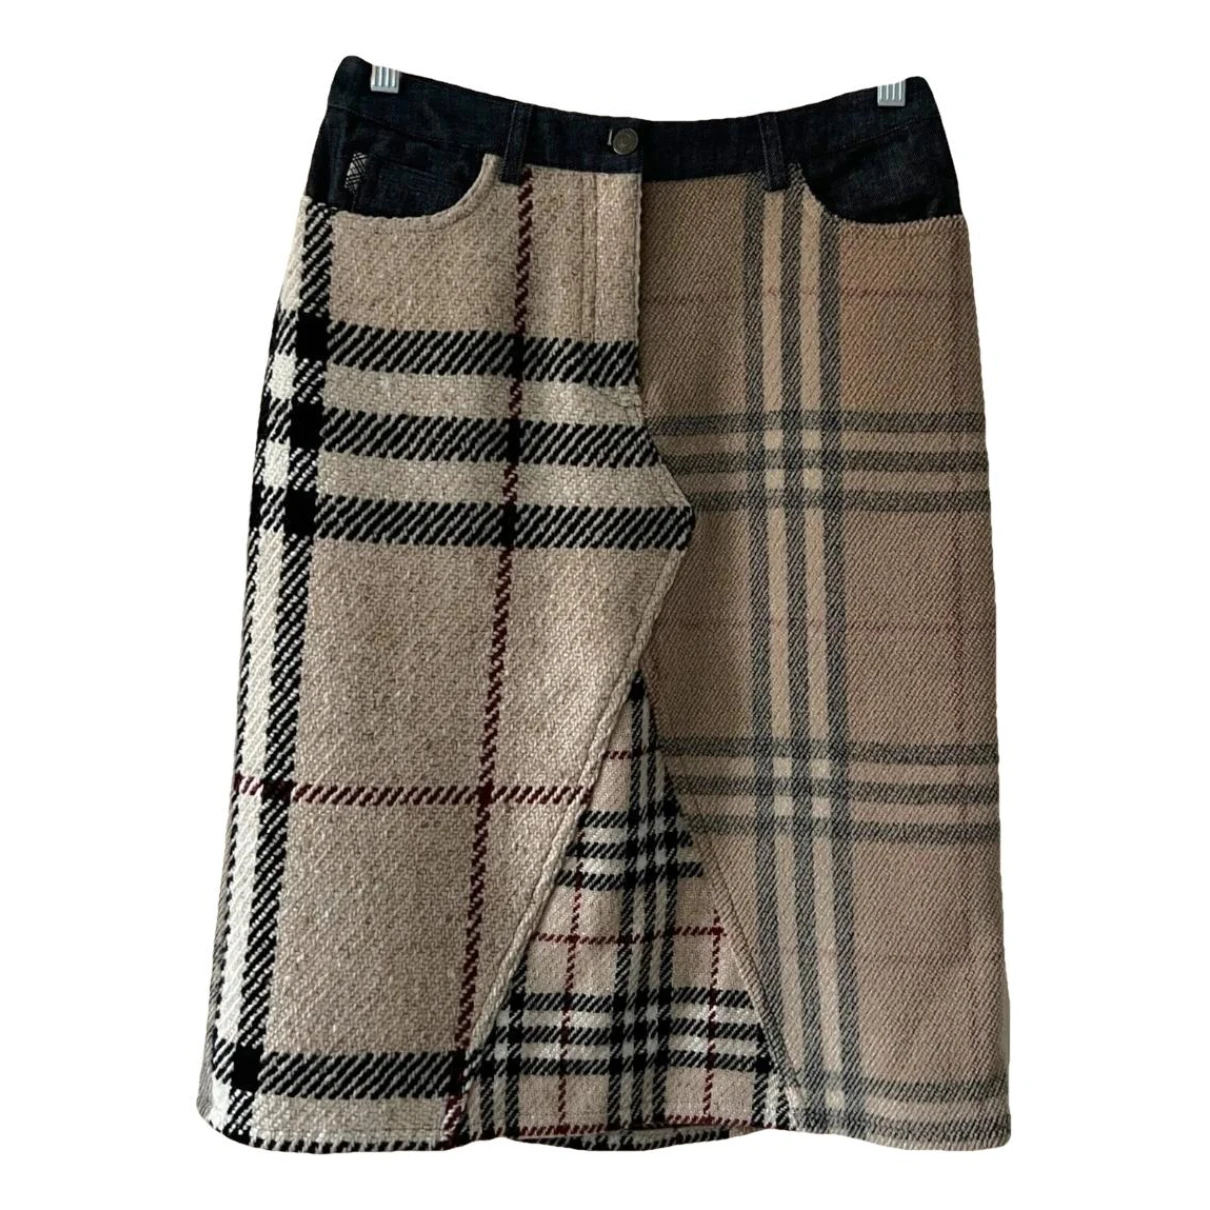 clothing Burberry skirts for Female Denim - Jeans 8 UK. Used condition